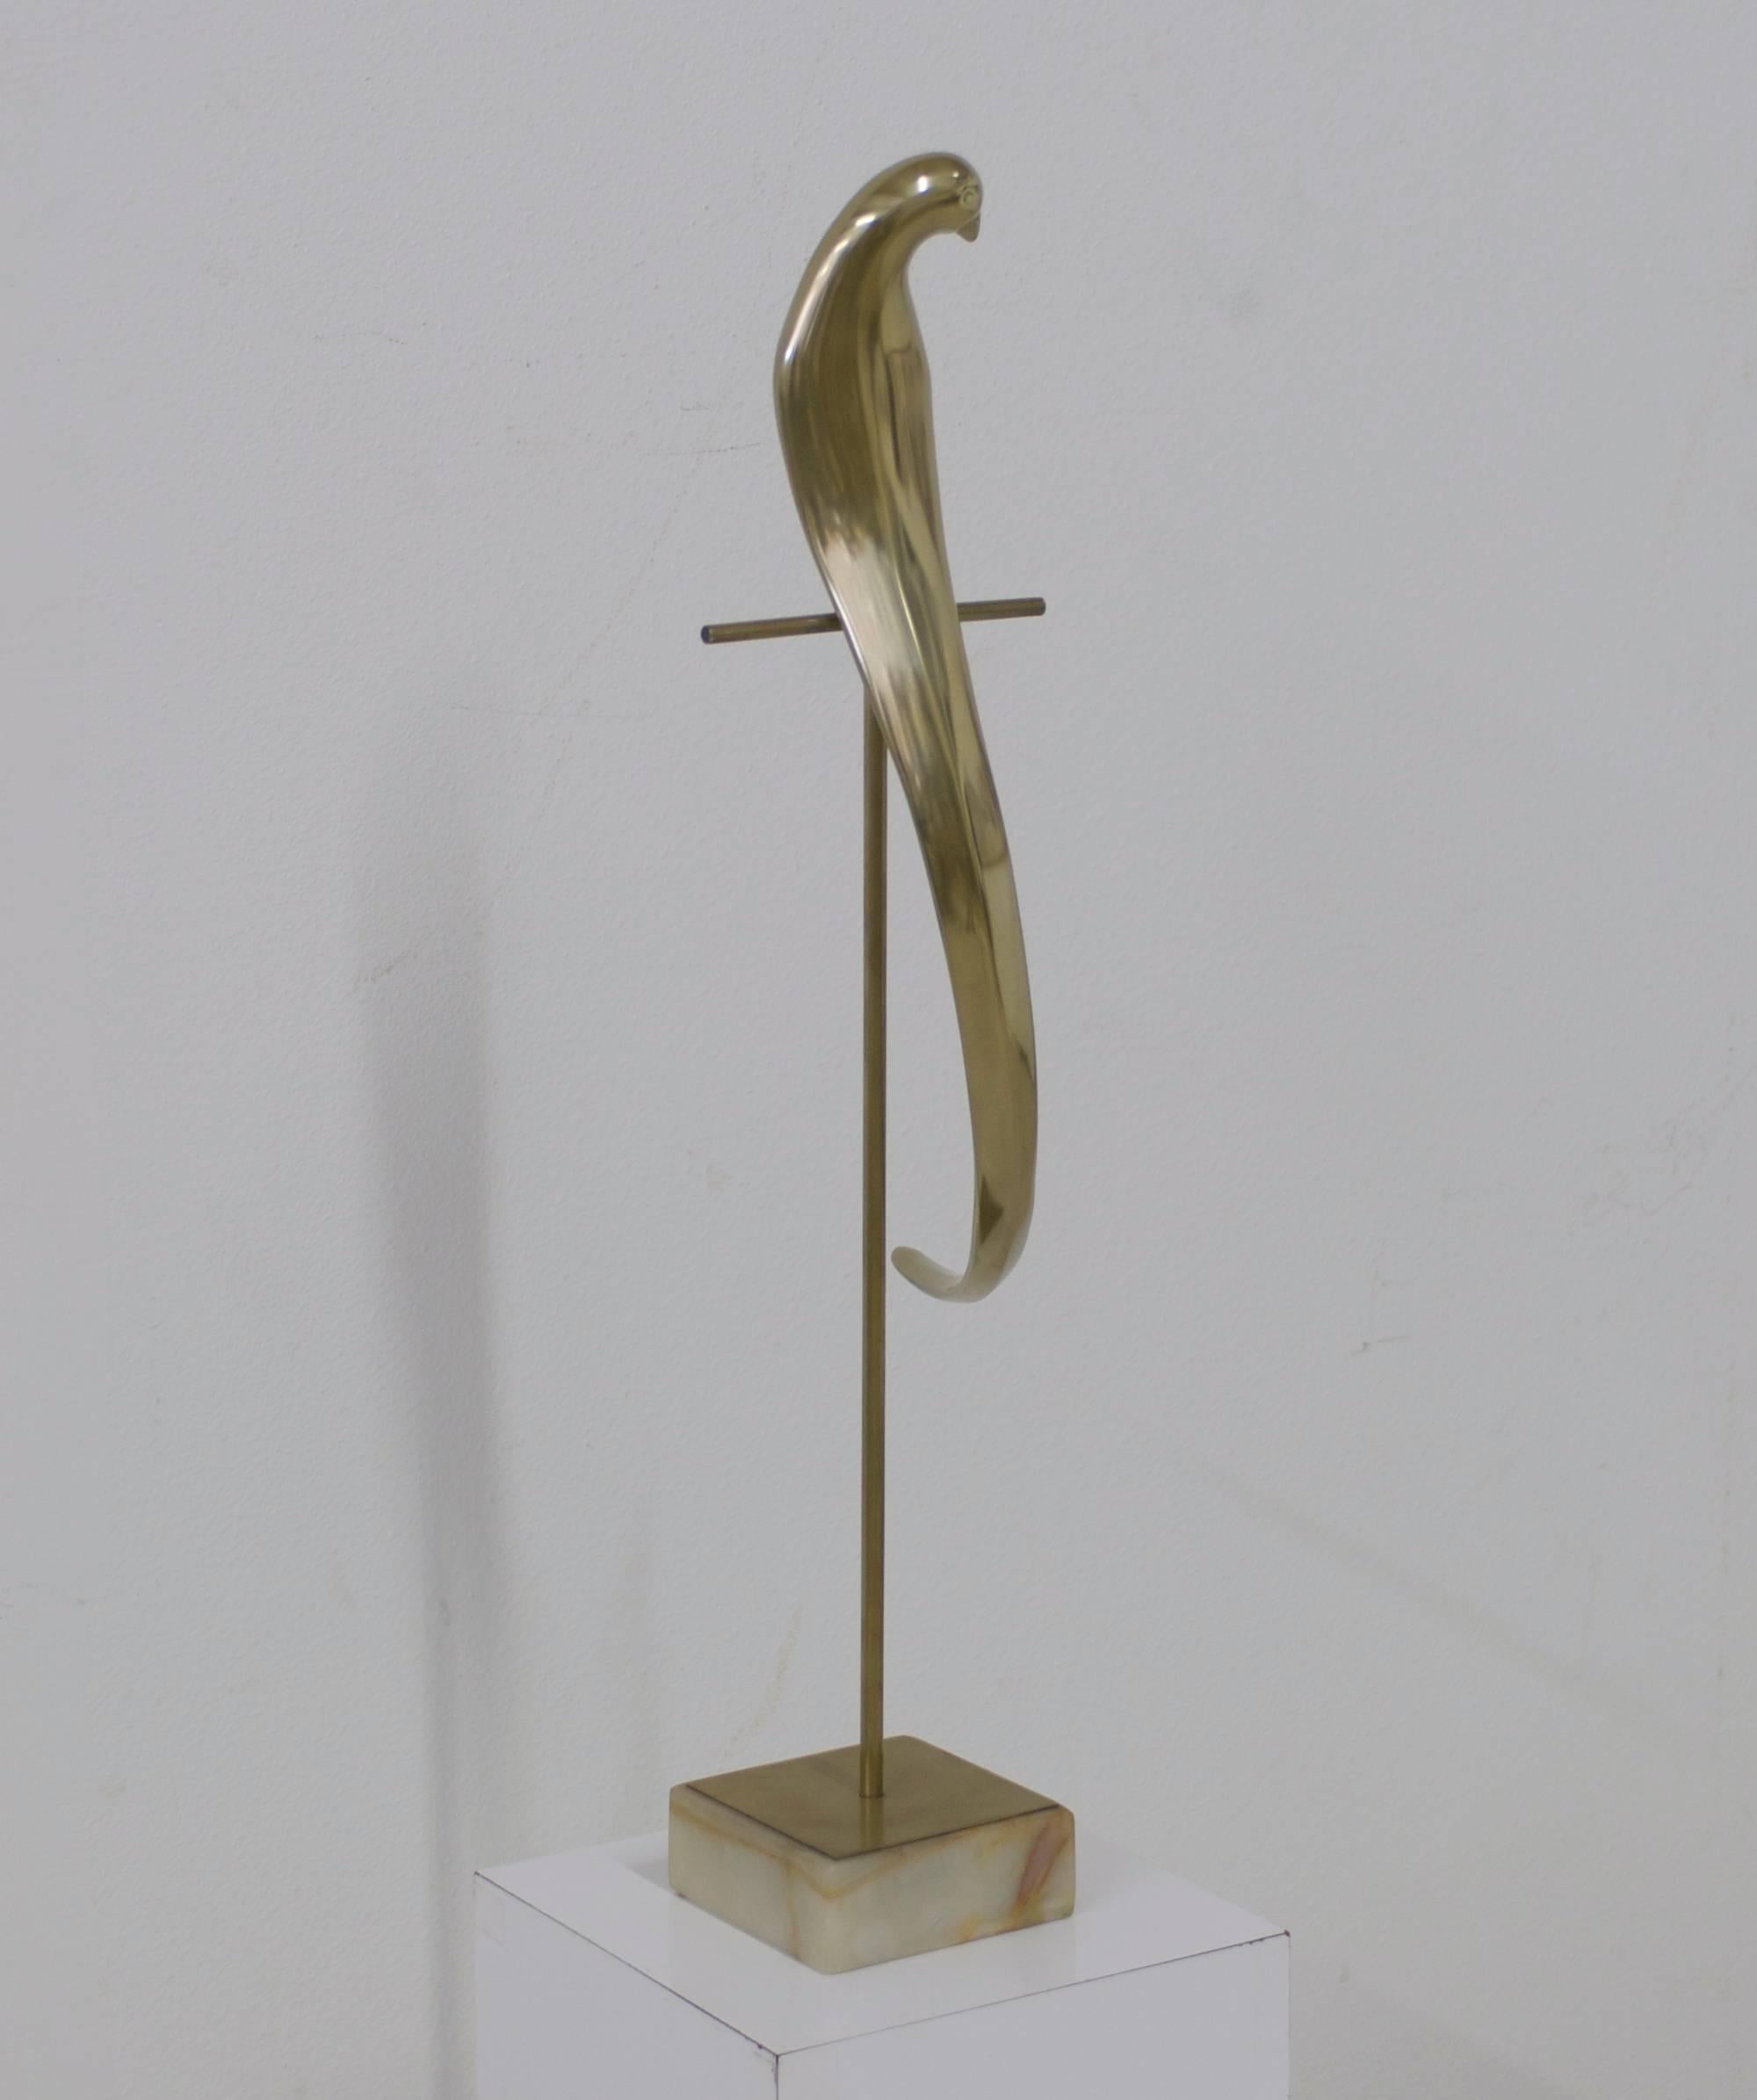 20th Century Jere Brass Bird Table Sculpture of Parrot on Perch Mounted on Marble Base For Sale